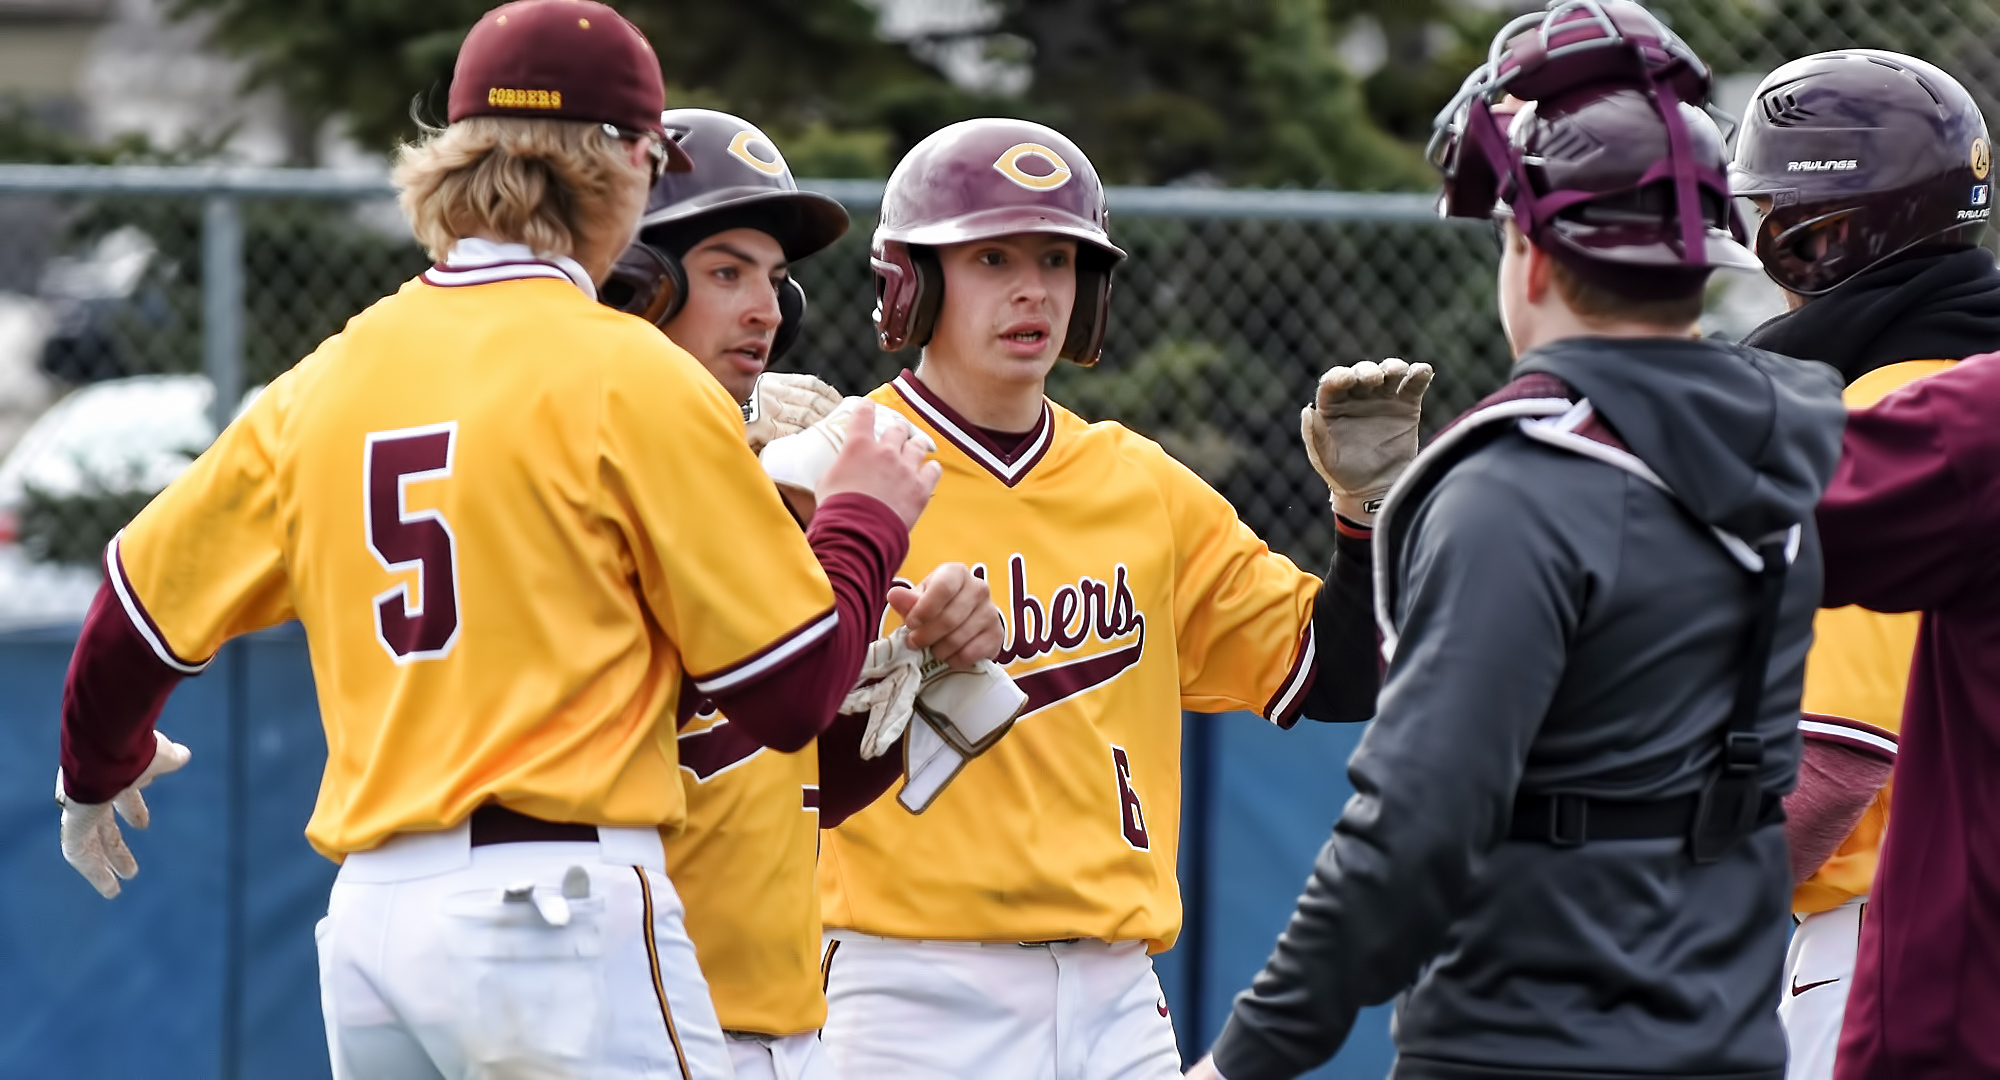 Senior Nate Hoeft had a hit in Game 2 of the Cobbers' split at St. Olaf.